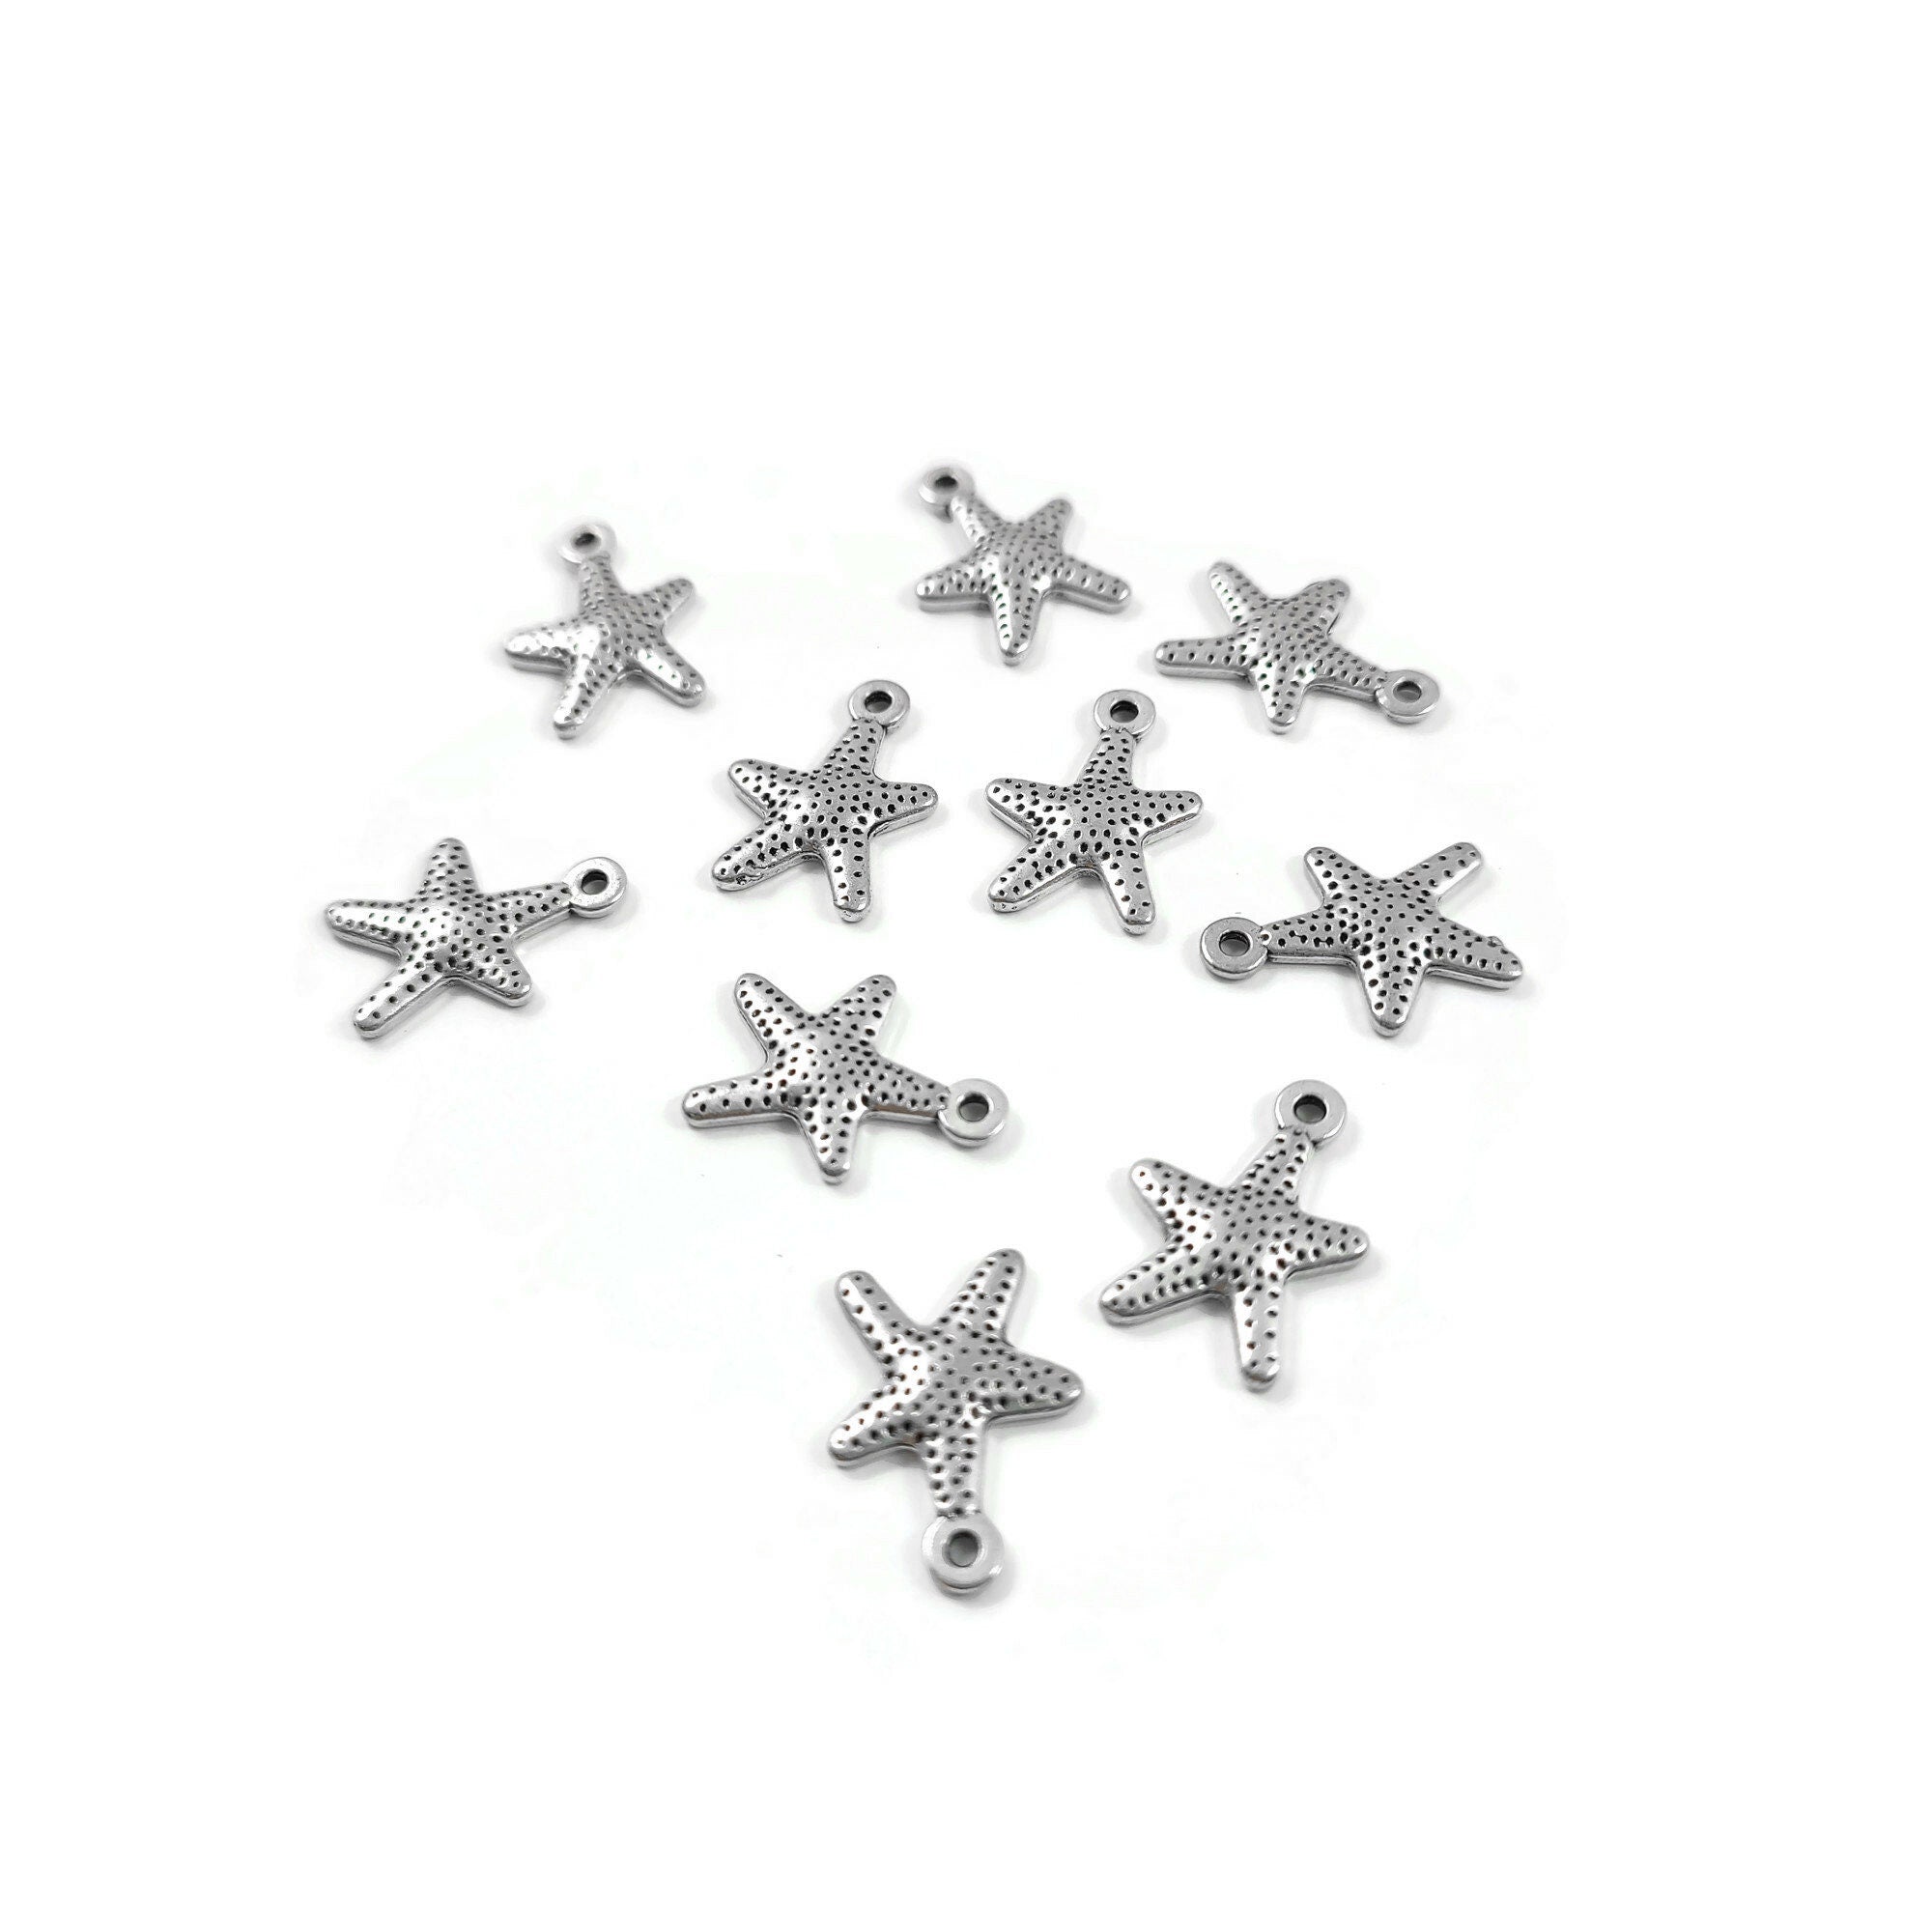 Vintage Silver Charms For Jewelry Making Set Starfish From